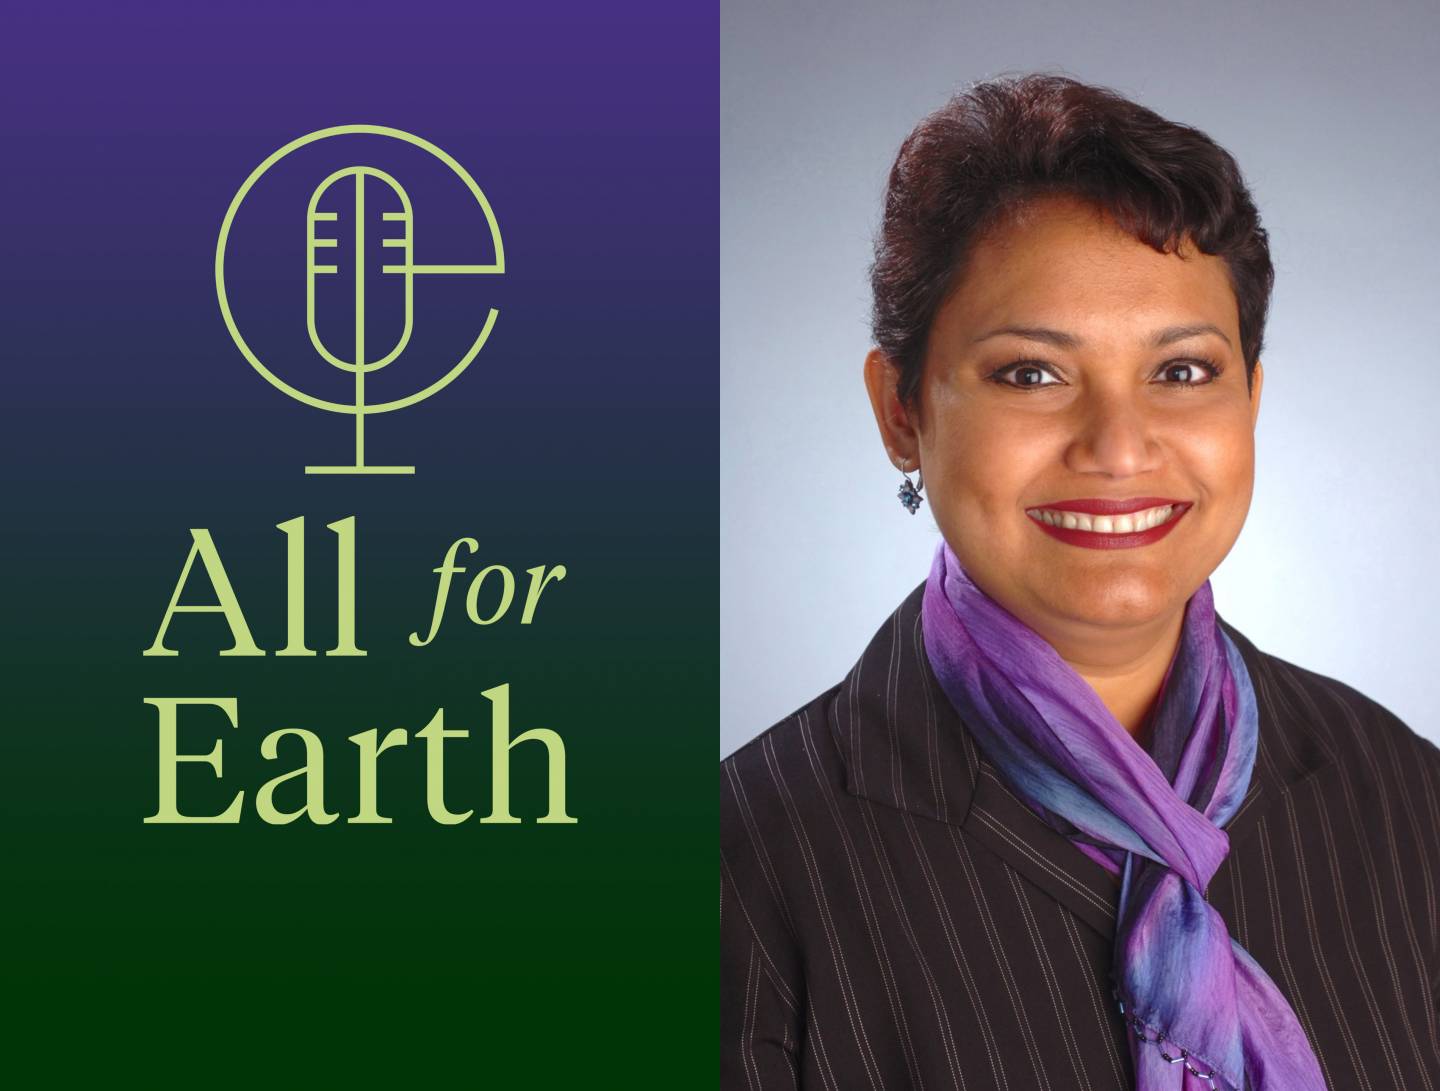 Farhana Sultana talks about the universal right to water on 'All for Earth' podcast - Princeton University